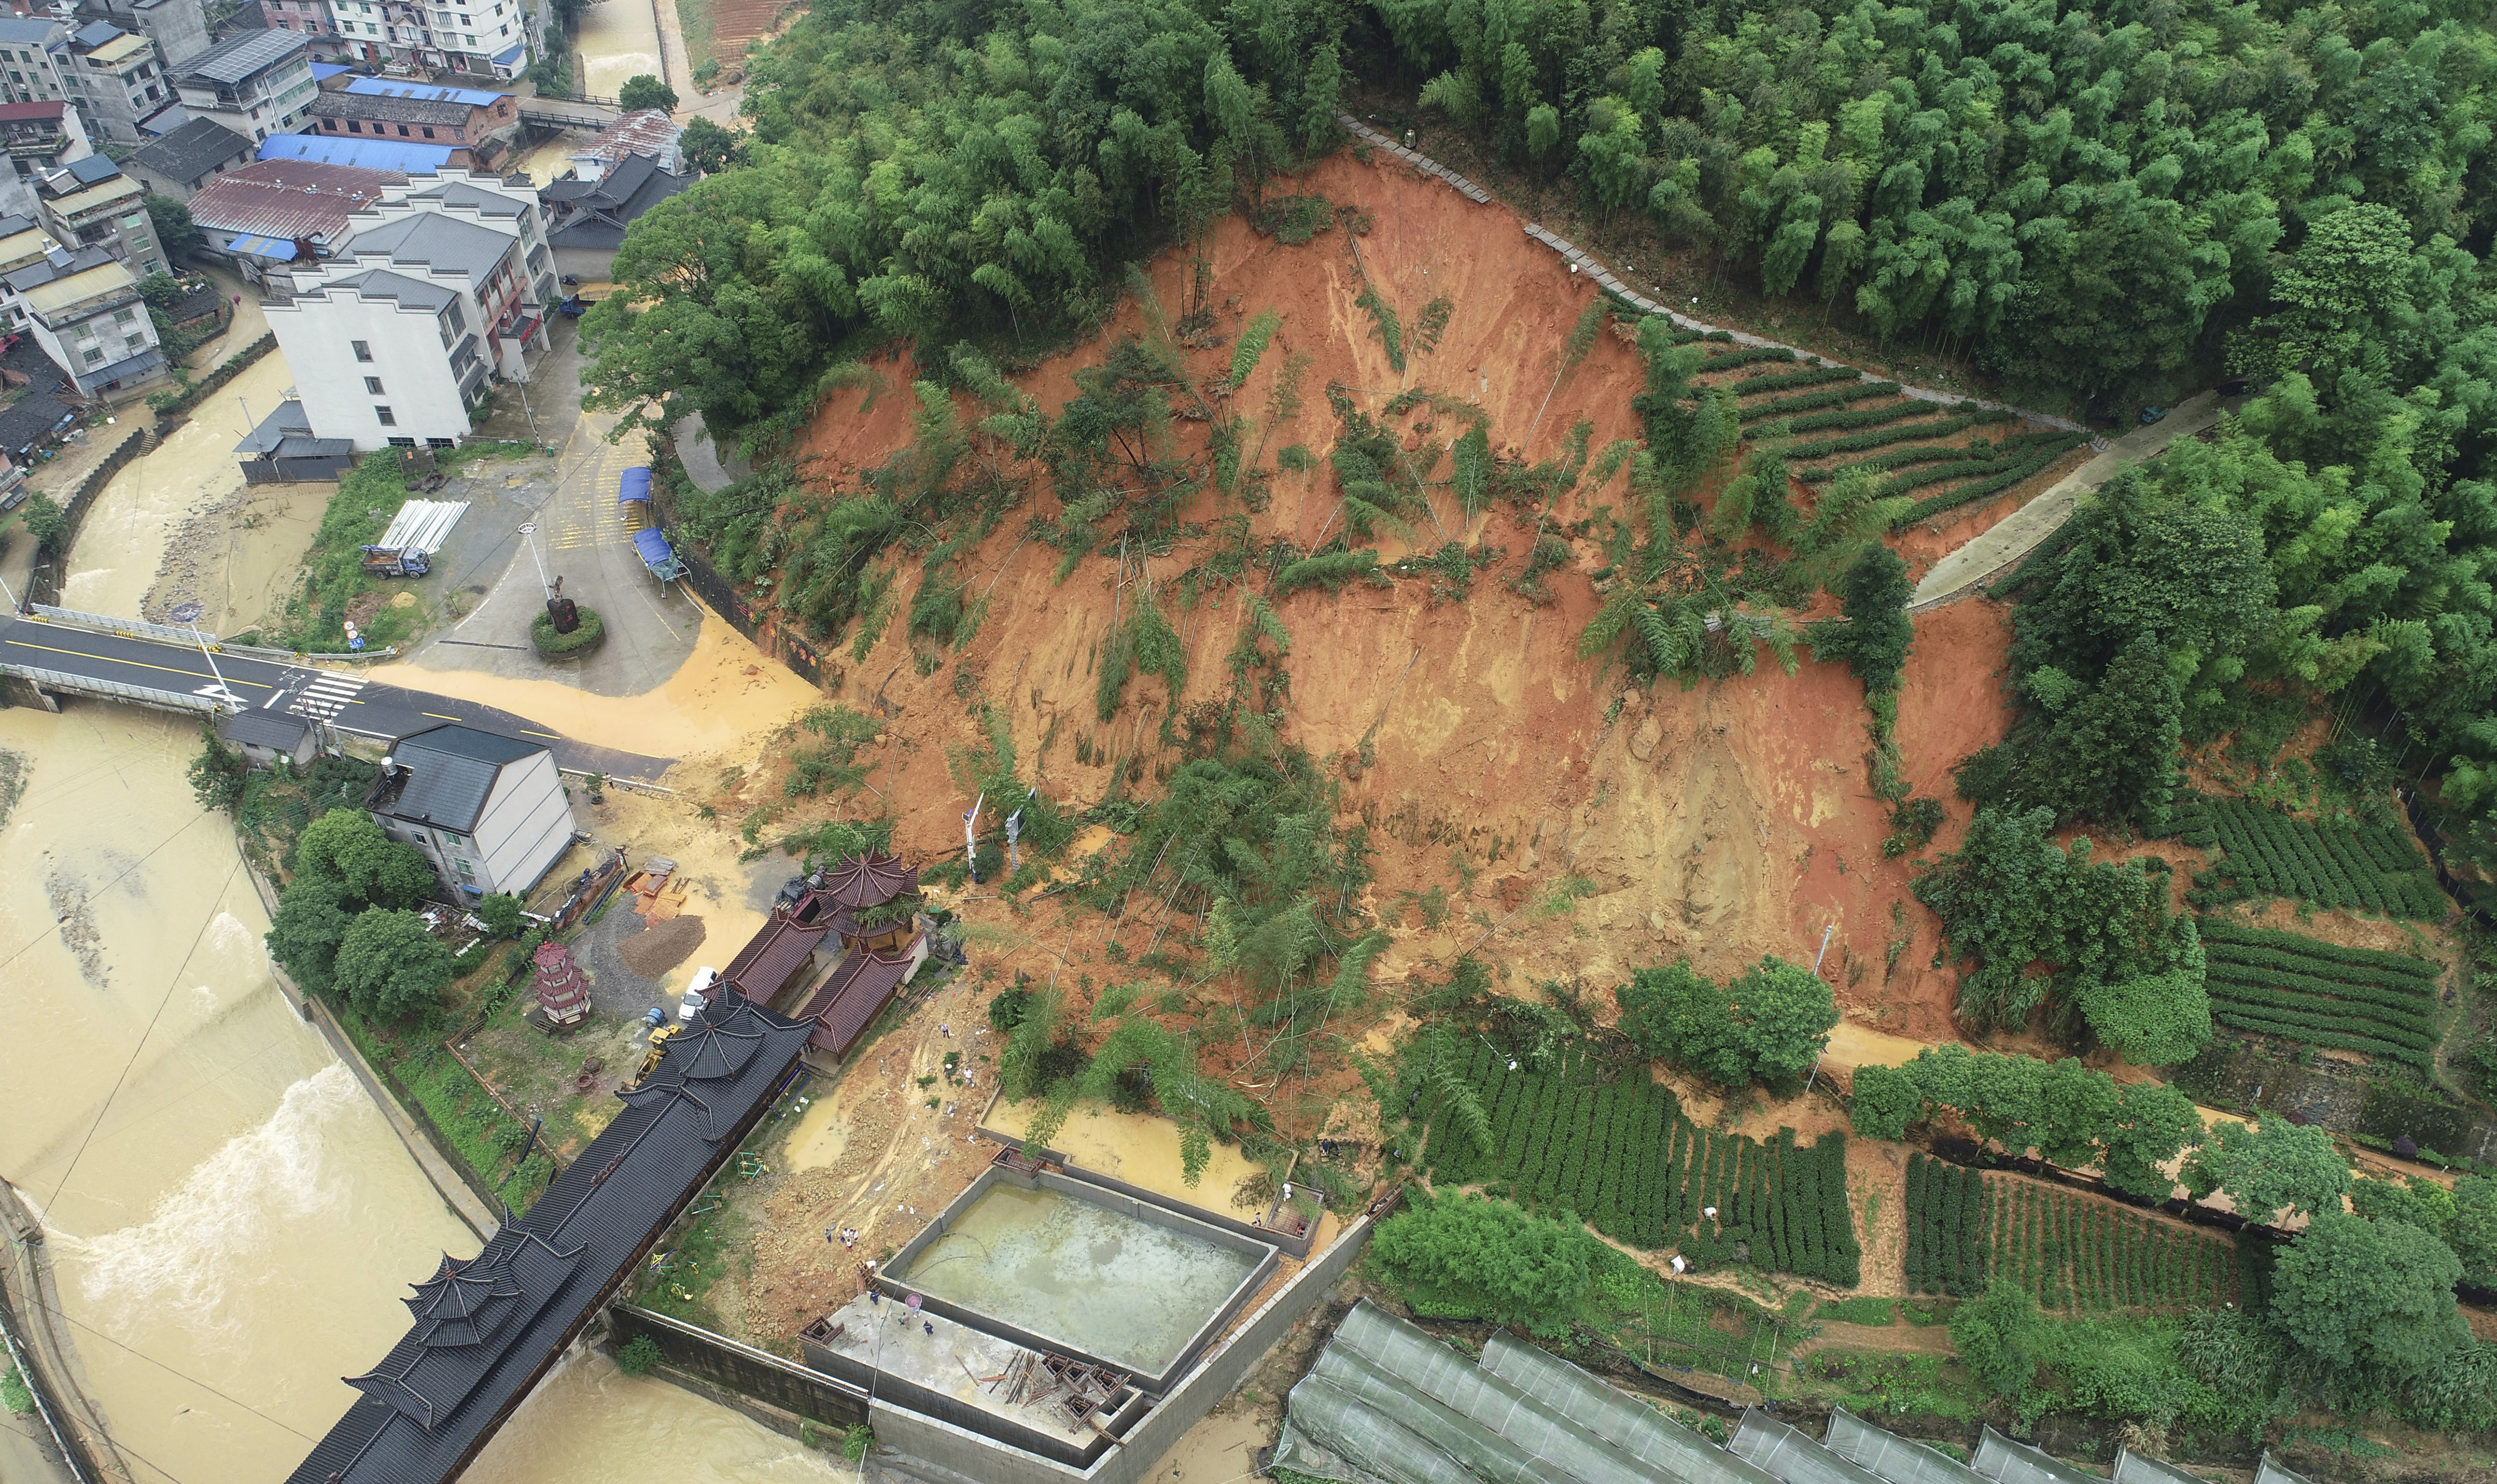 In this photo released by Xinhua News Agency, an aerial drone photo taken on June 16, 2024 shows a landslide in an area affected by torrential rains in Tieshan Township of Zhenghe County, Nanping City in southeastern China's Fujian Province. Southern China was reeling Tuesday from heavy rains that triggered landslides killing at least nine people, knocking out power for entire villages and burying crops. Meanwhile, northern parts of the country are battling drought, as the country faces two extremes of severe weather.(Huang Jiemin/Xinhua via AP)